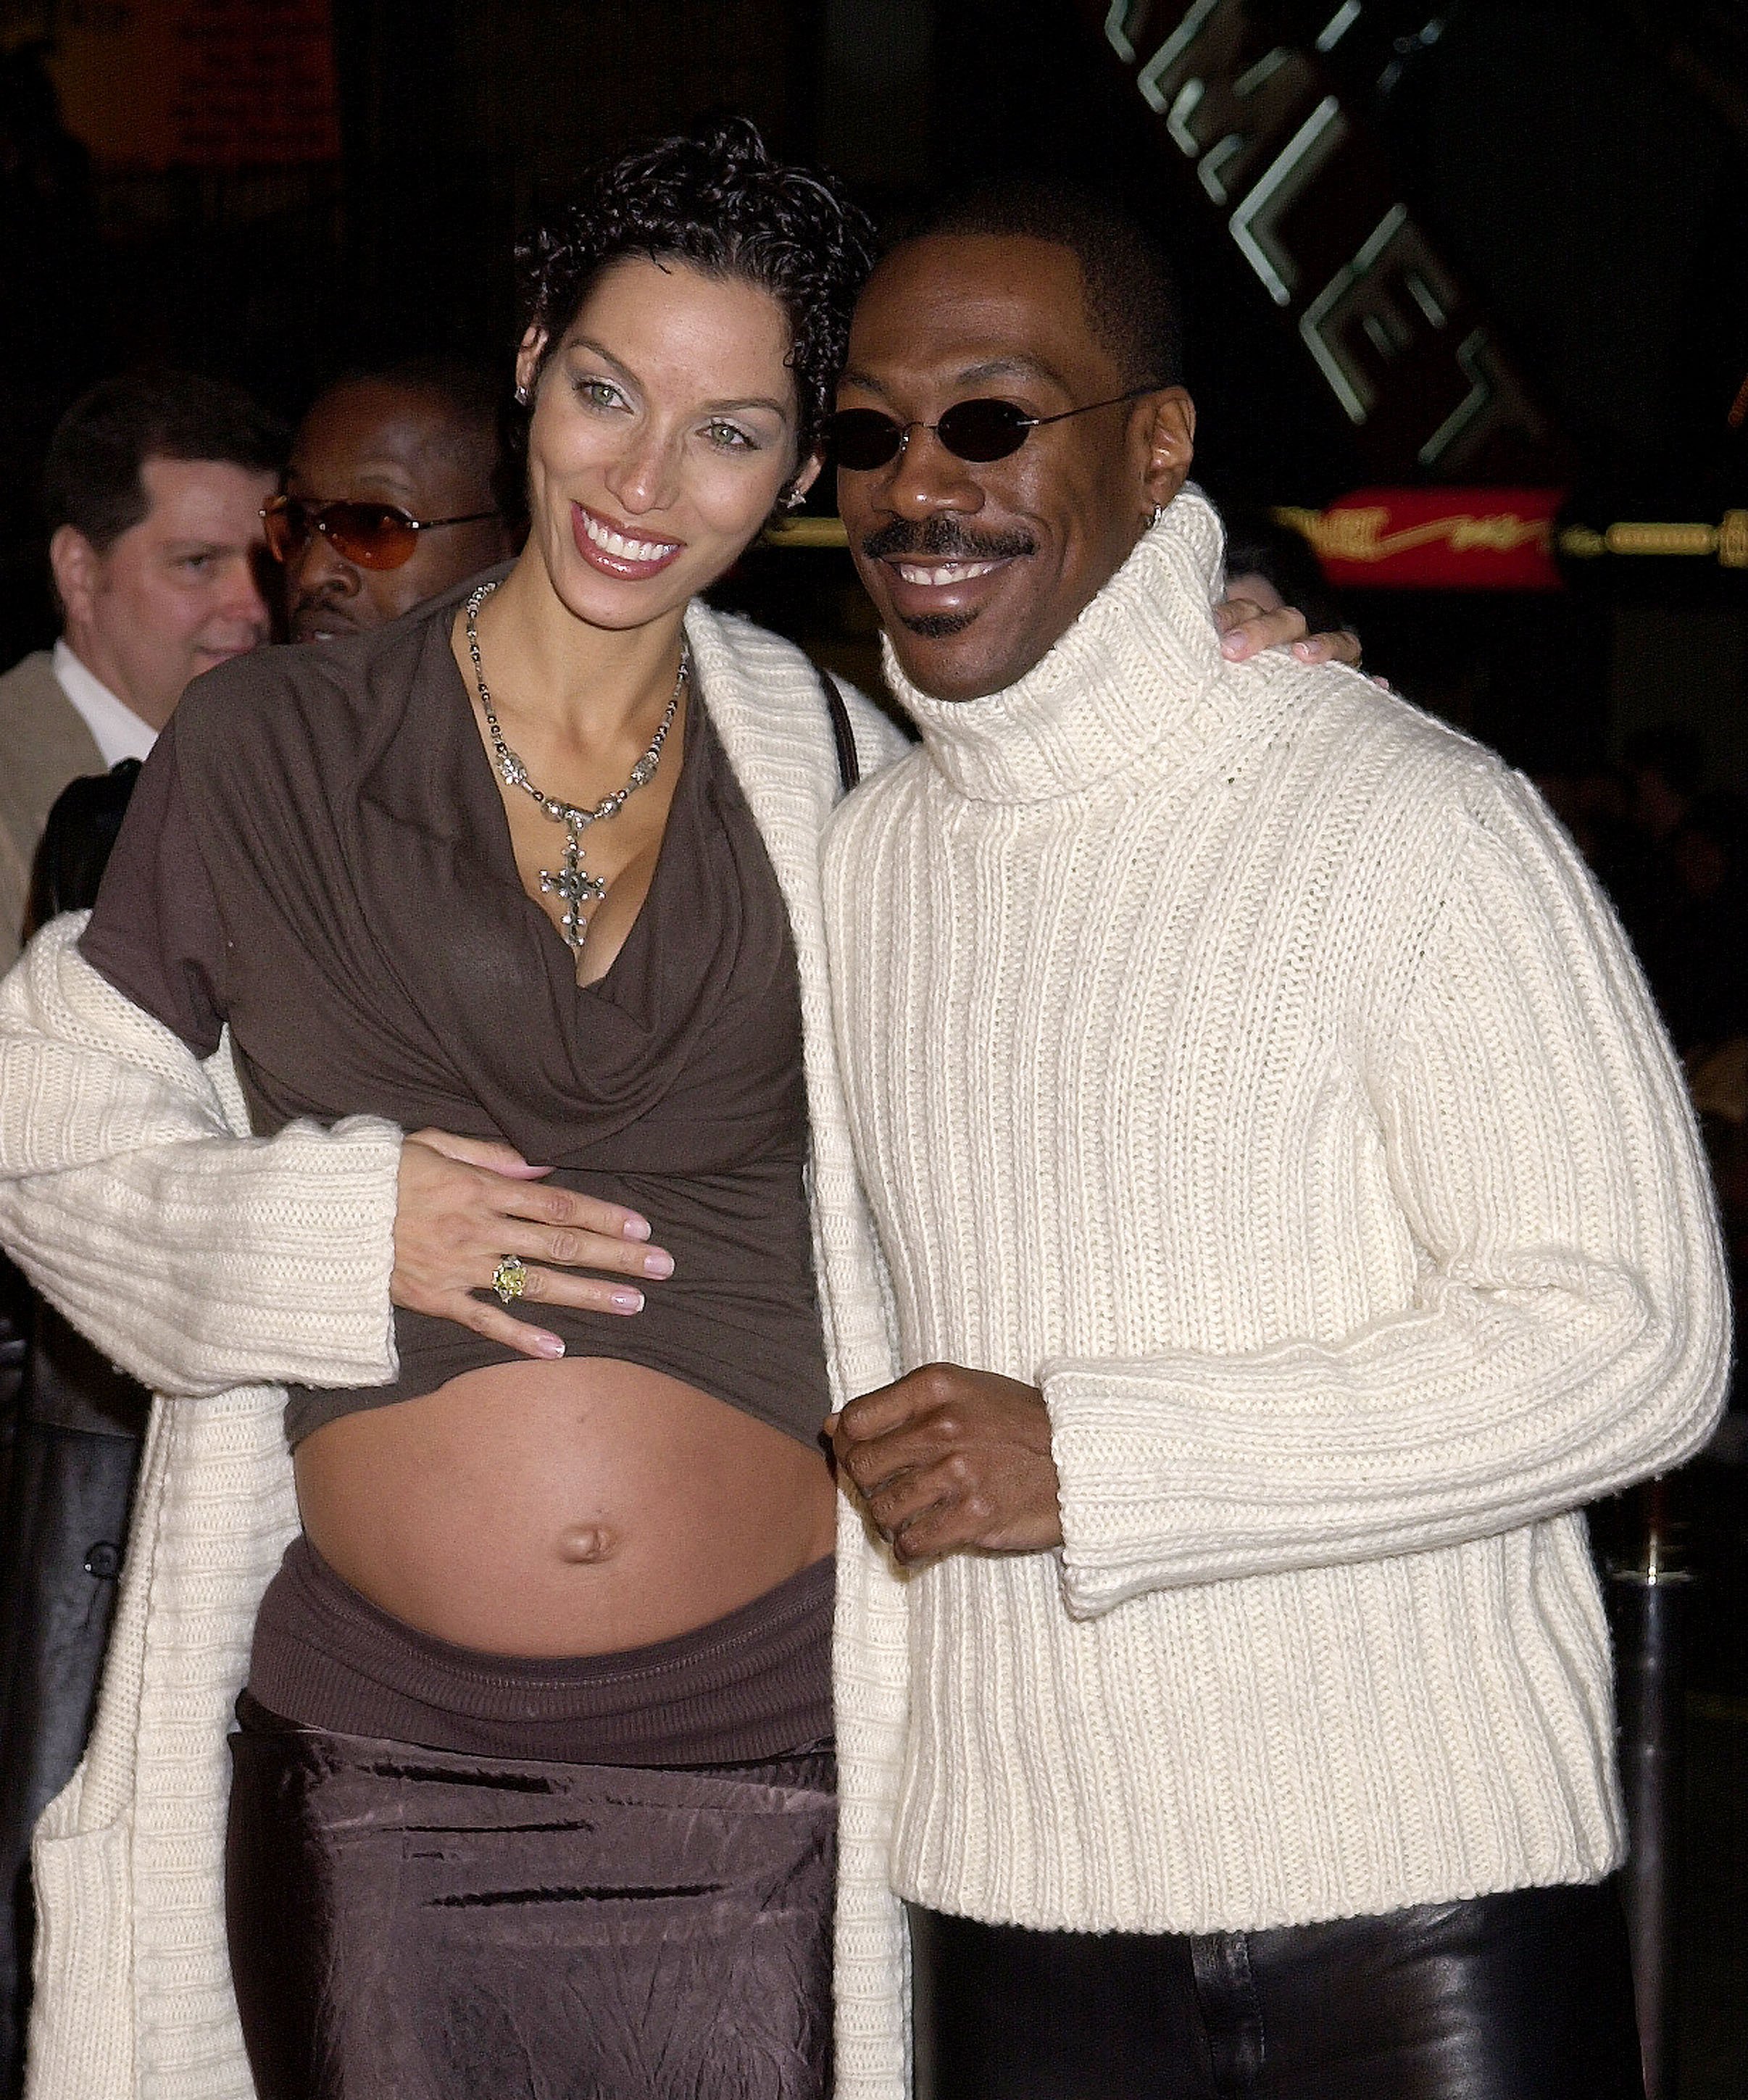 Nicole and Eddie Murphy during "Ali" Los Angeles premiere in Hollywood, California, on December 12, 2001. | Source: Getty Images